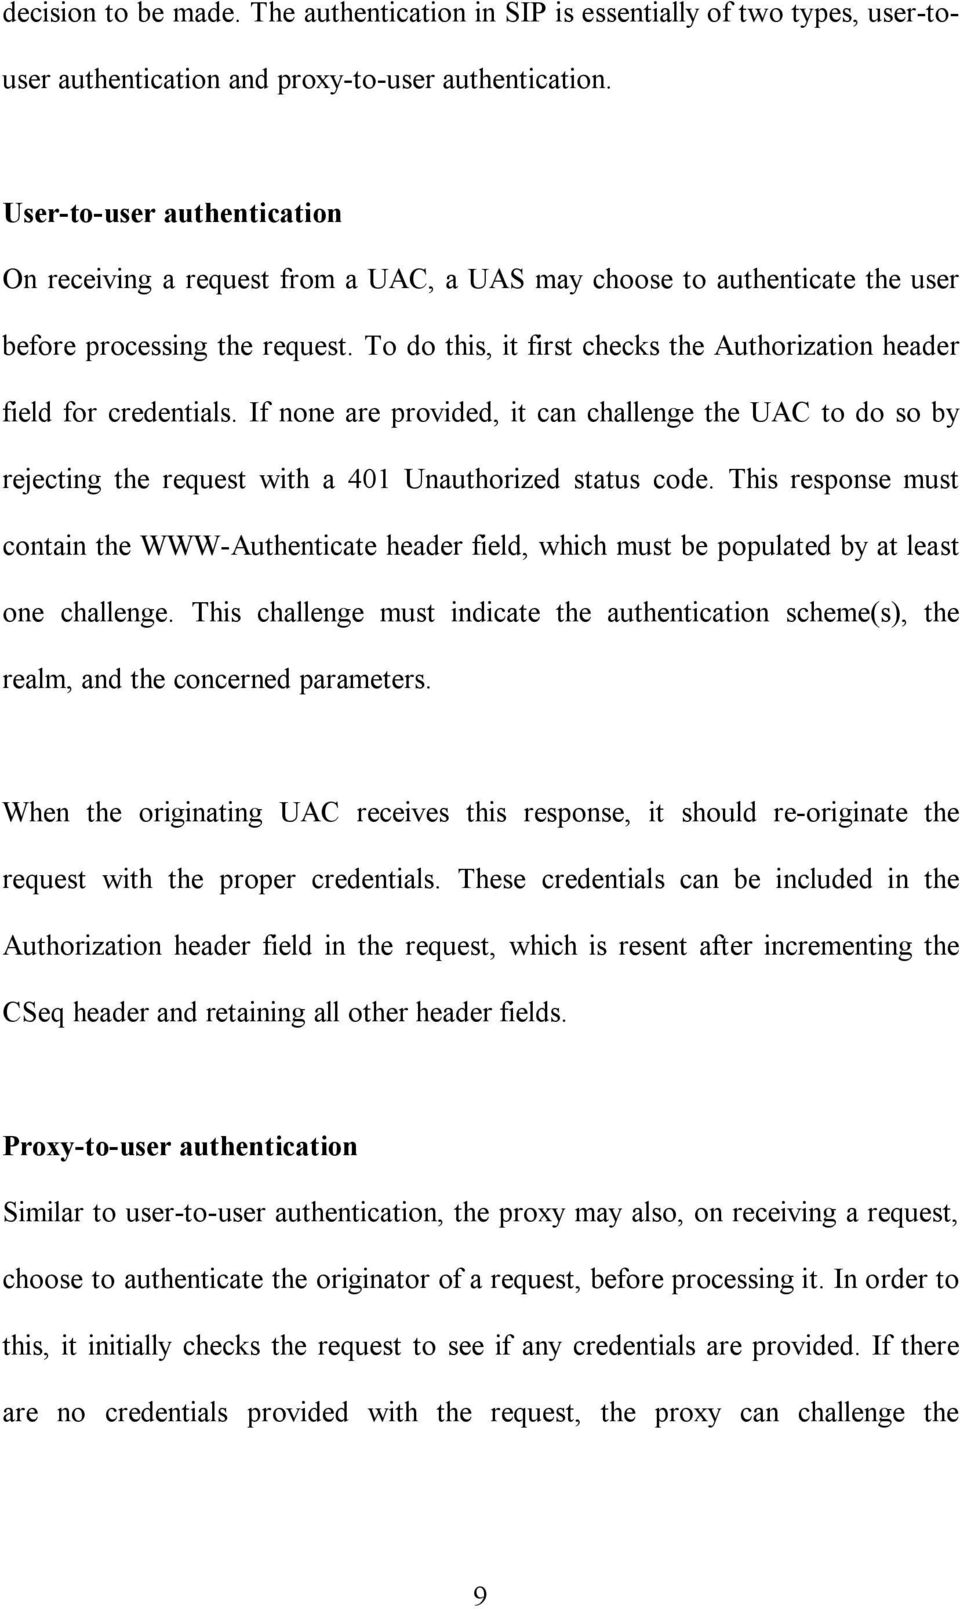 To do this, it first checks the Authorization header field for credentials. If none are provided, it can challenge the UAC to do so by rejecting the request with a 401 Unauthorized status code.